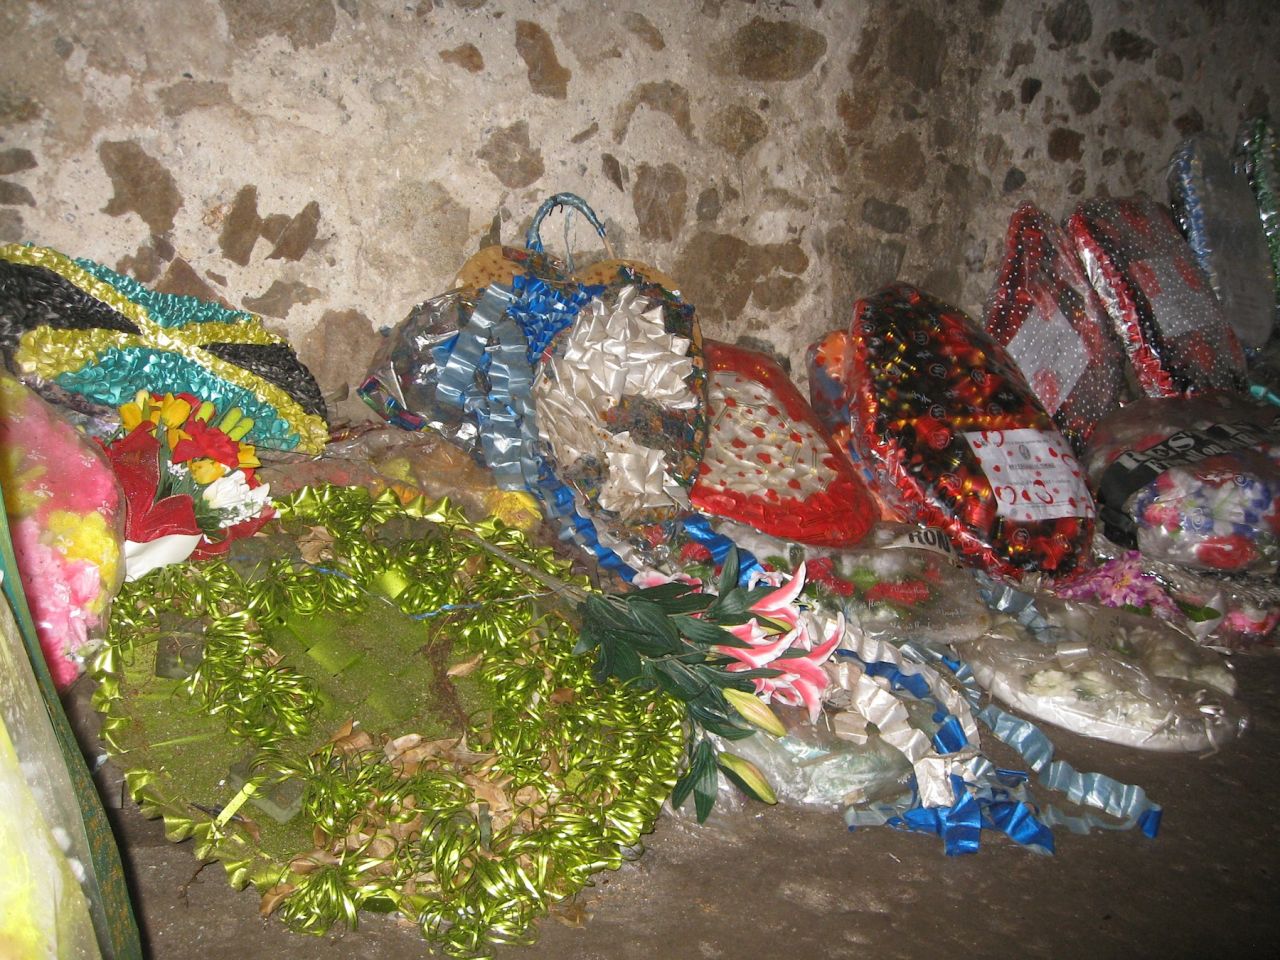 Gifts line the walls on the women's dungeon. The guide says they are left by descendents of slaves who have come back to understand their ancestors' enslavement, and to honor their them.